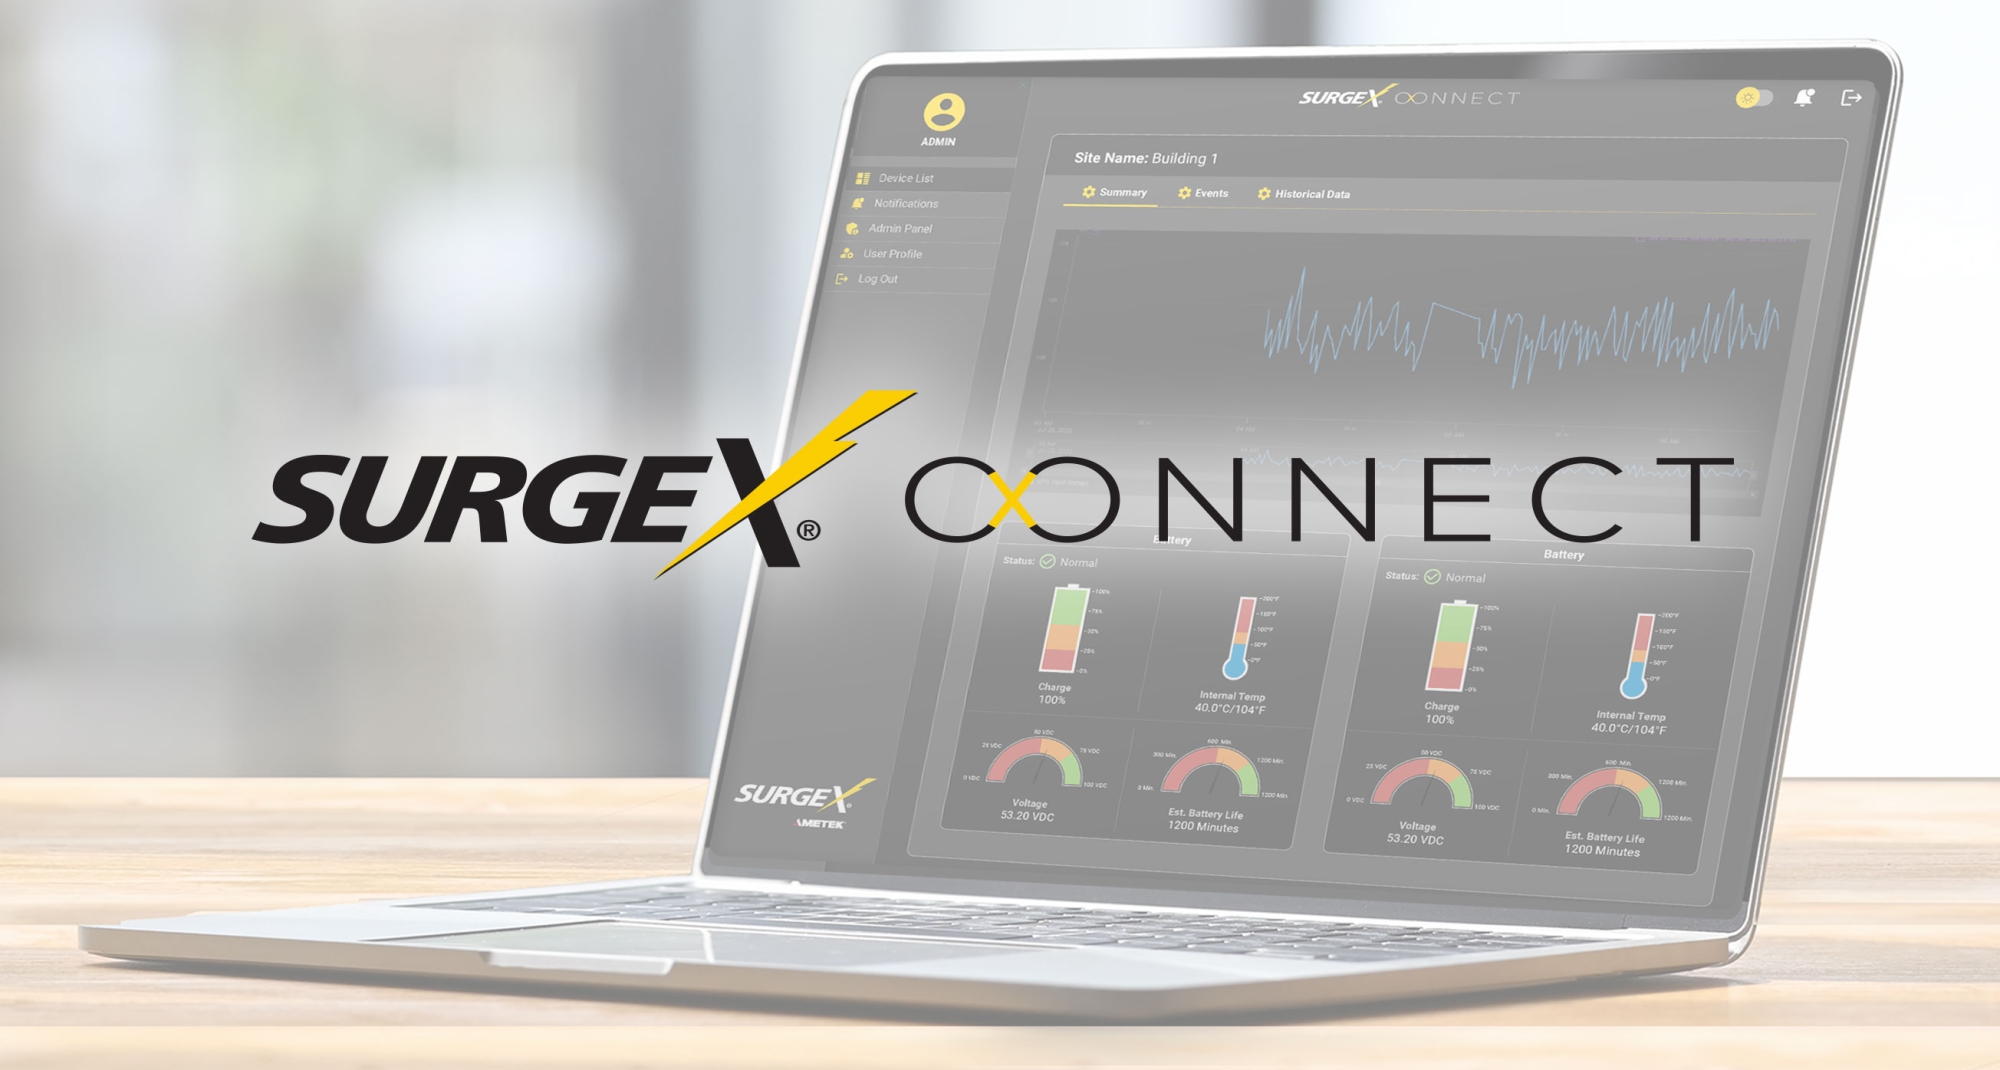 SurgeX introduces SurgeX Connect, empowering AV integrators with advanced power quality monitoring and fleet management capabilities for installations.